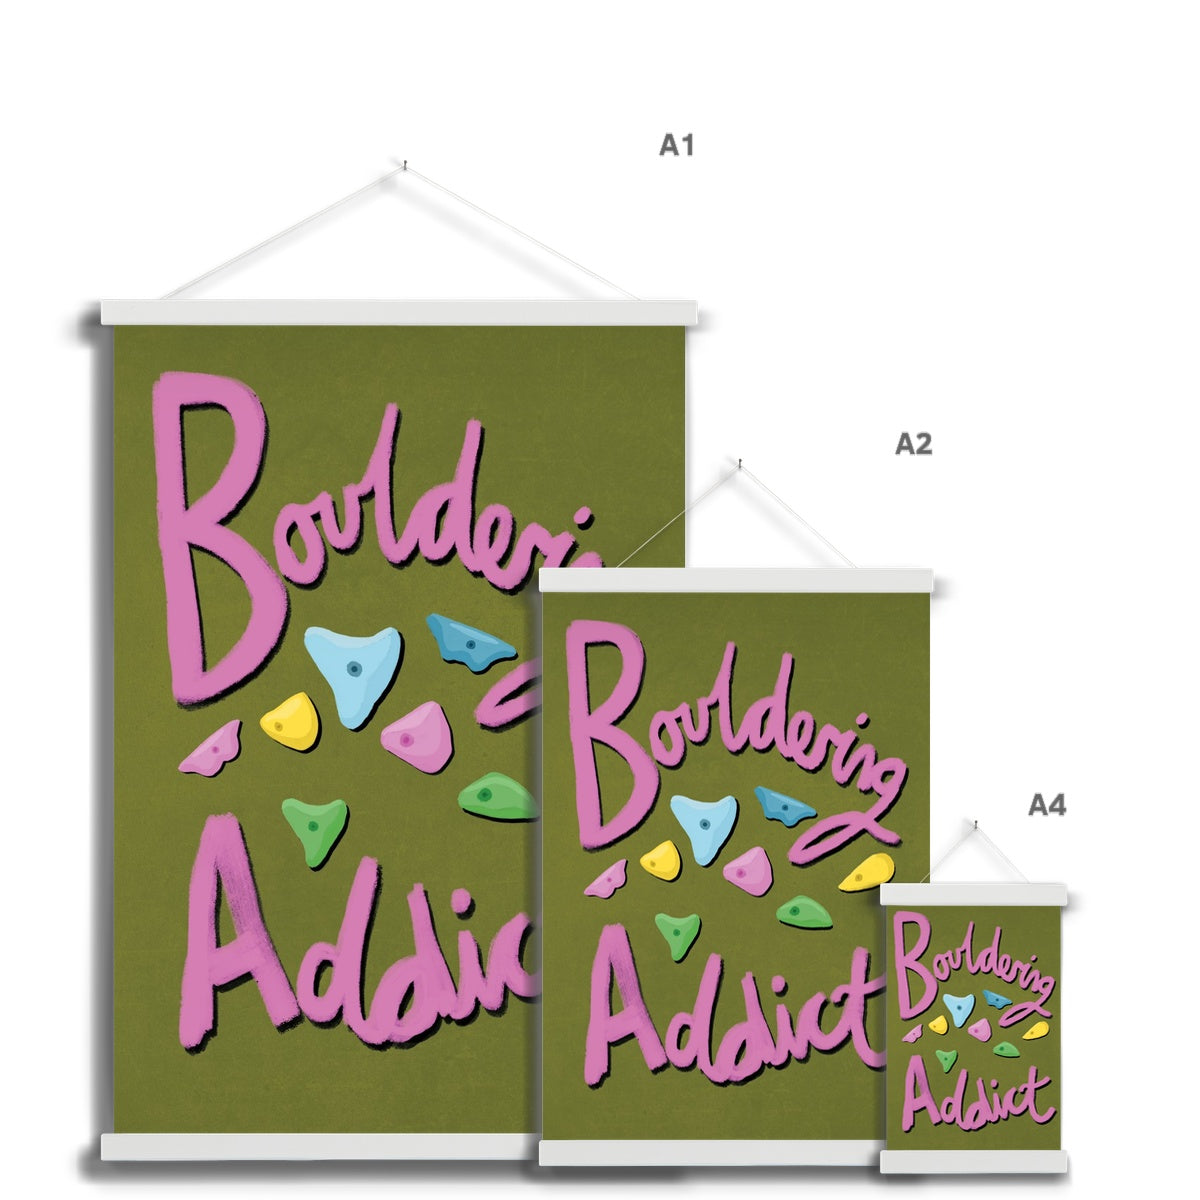 Bouldering Addict - Olive Green and Pink Fine Art Print with Hanger